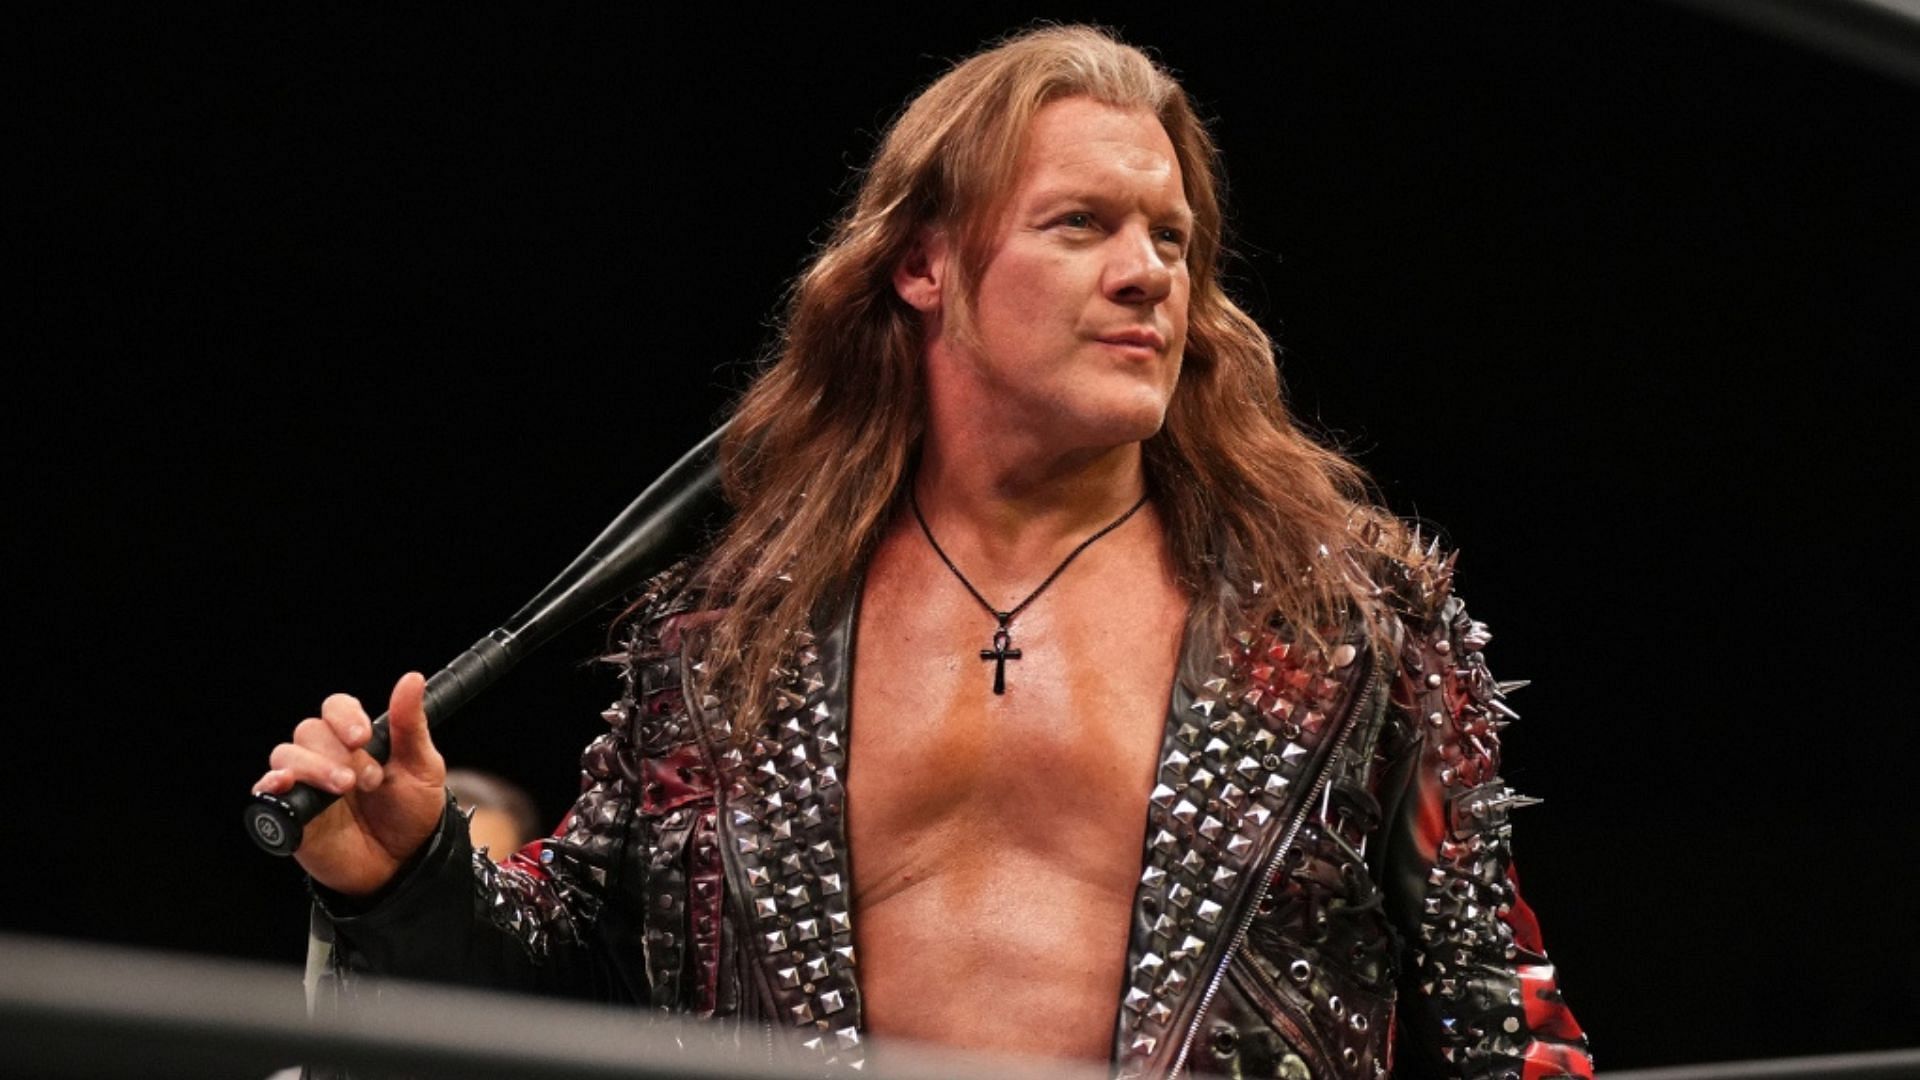 Chris Jericho is a former AEW World Champion